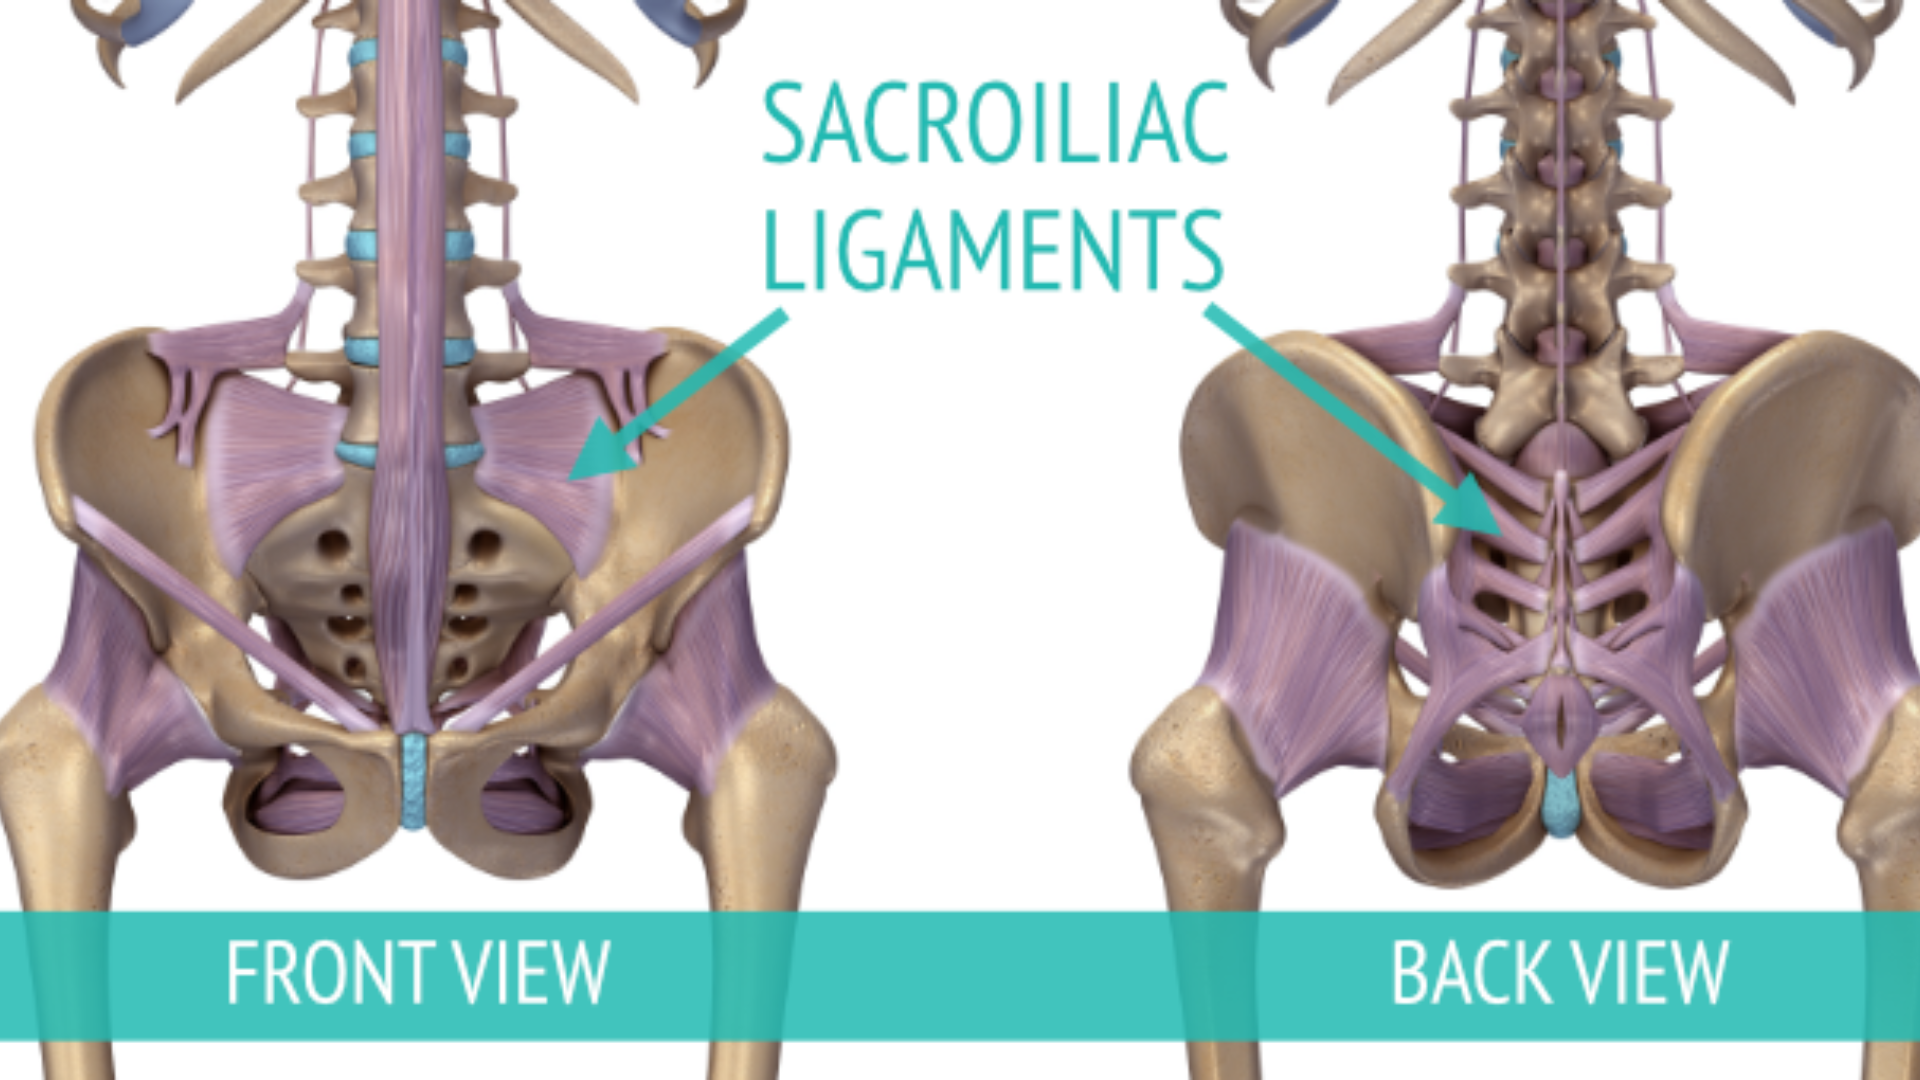 Anatomy Image depicts the sacroiliac (SI) ligaments that bind your sacrum to your pelvis and your spine are very strong.